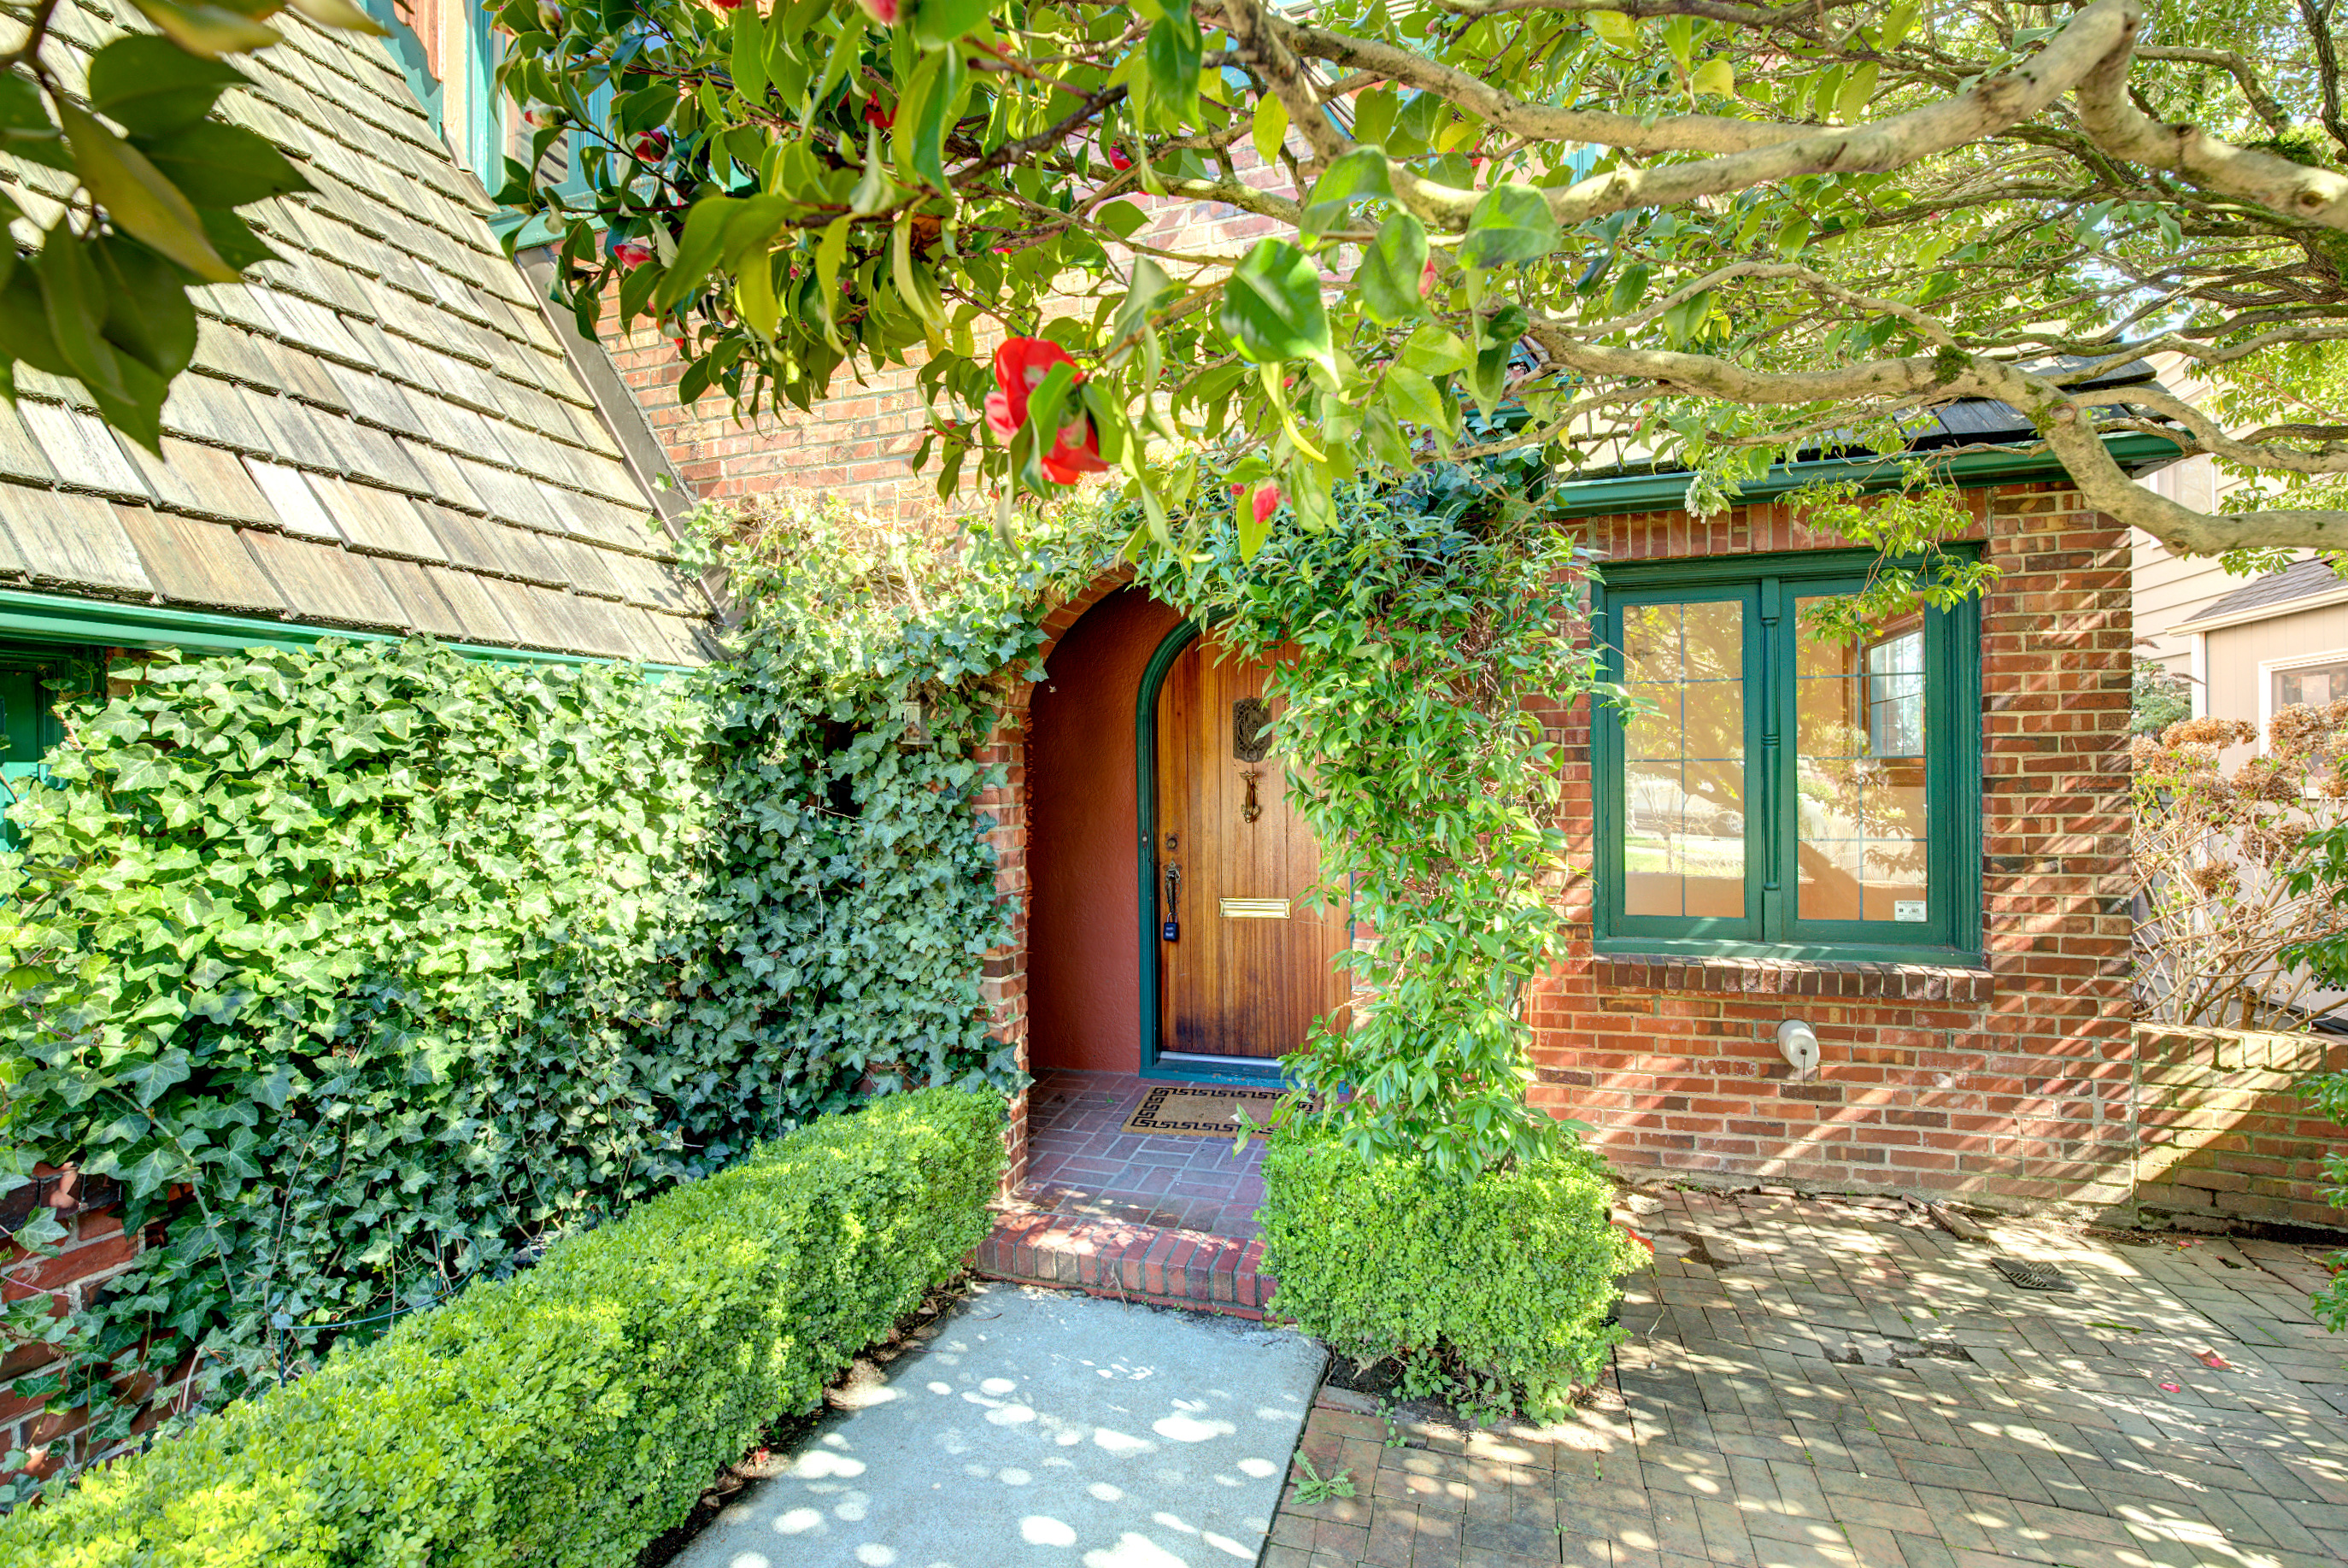 The front walkway of a brick house with green trim is covered in ivy